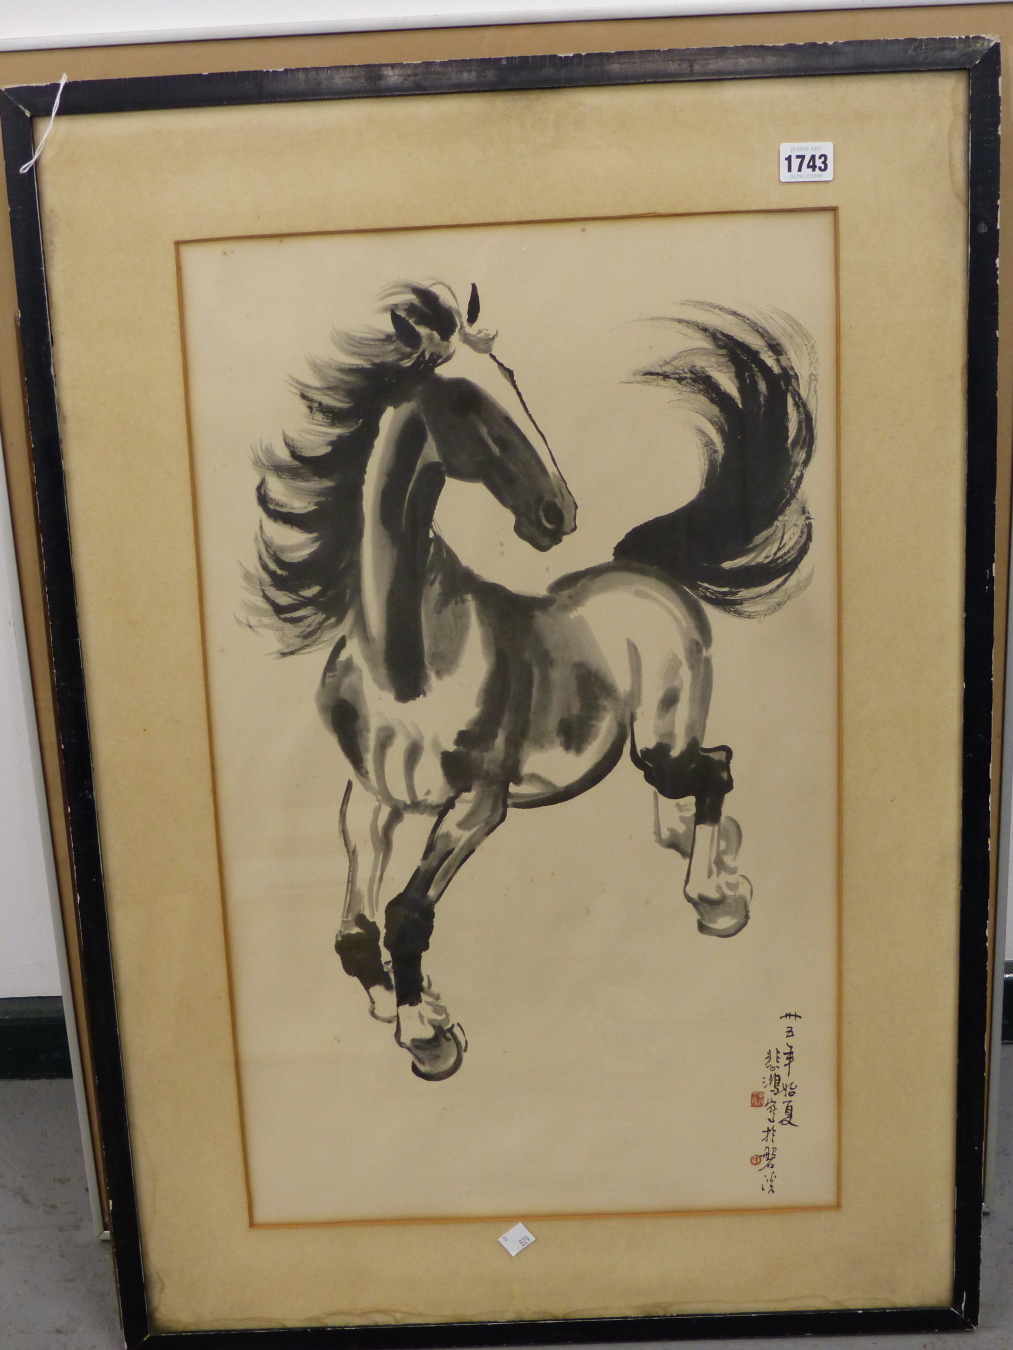 AFTER XU BEIHONG, CHINESE 1895-1953. GALLOPING HORSE PRINT, 65 X 38 CM. - Image 2 of 3